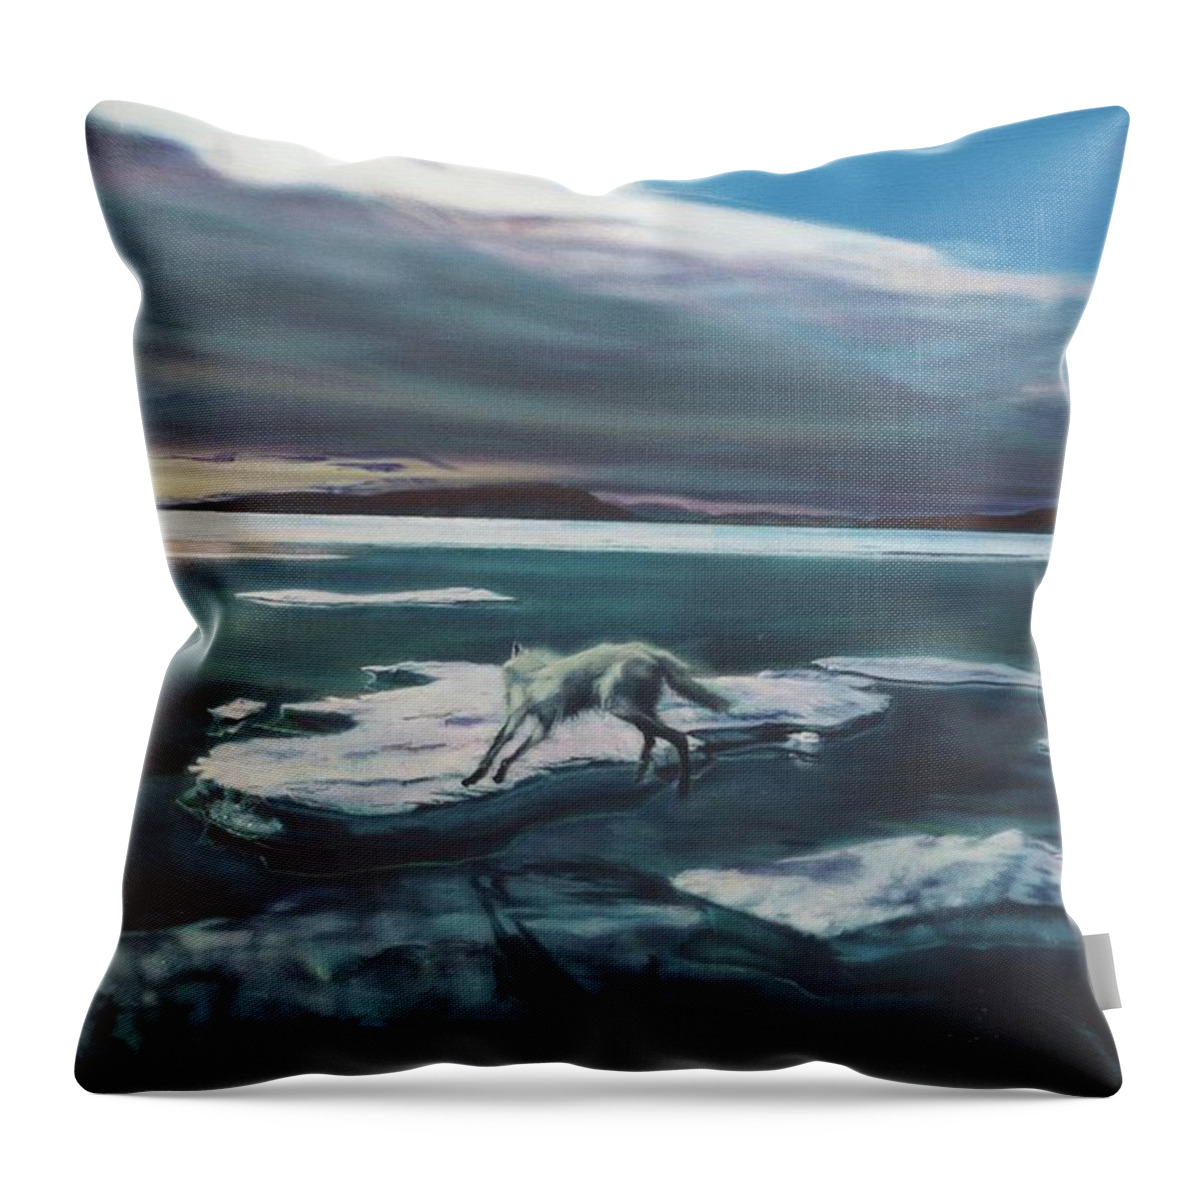 Realism Throw Pillow featuring the painting Arctic Wolf by Sean Connolly